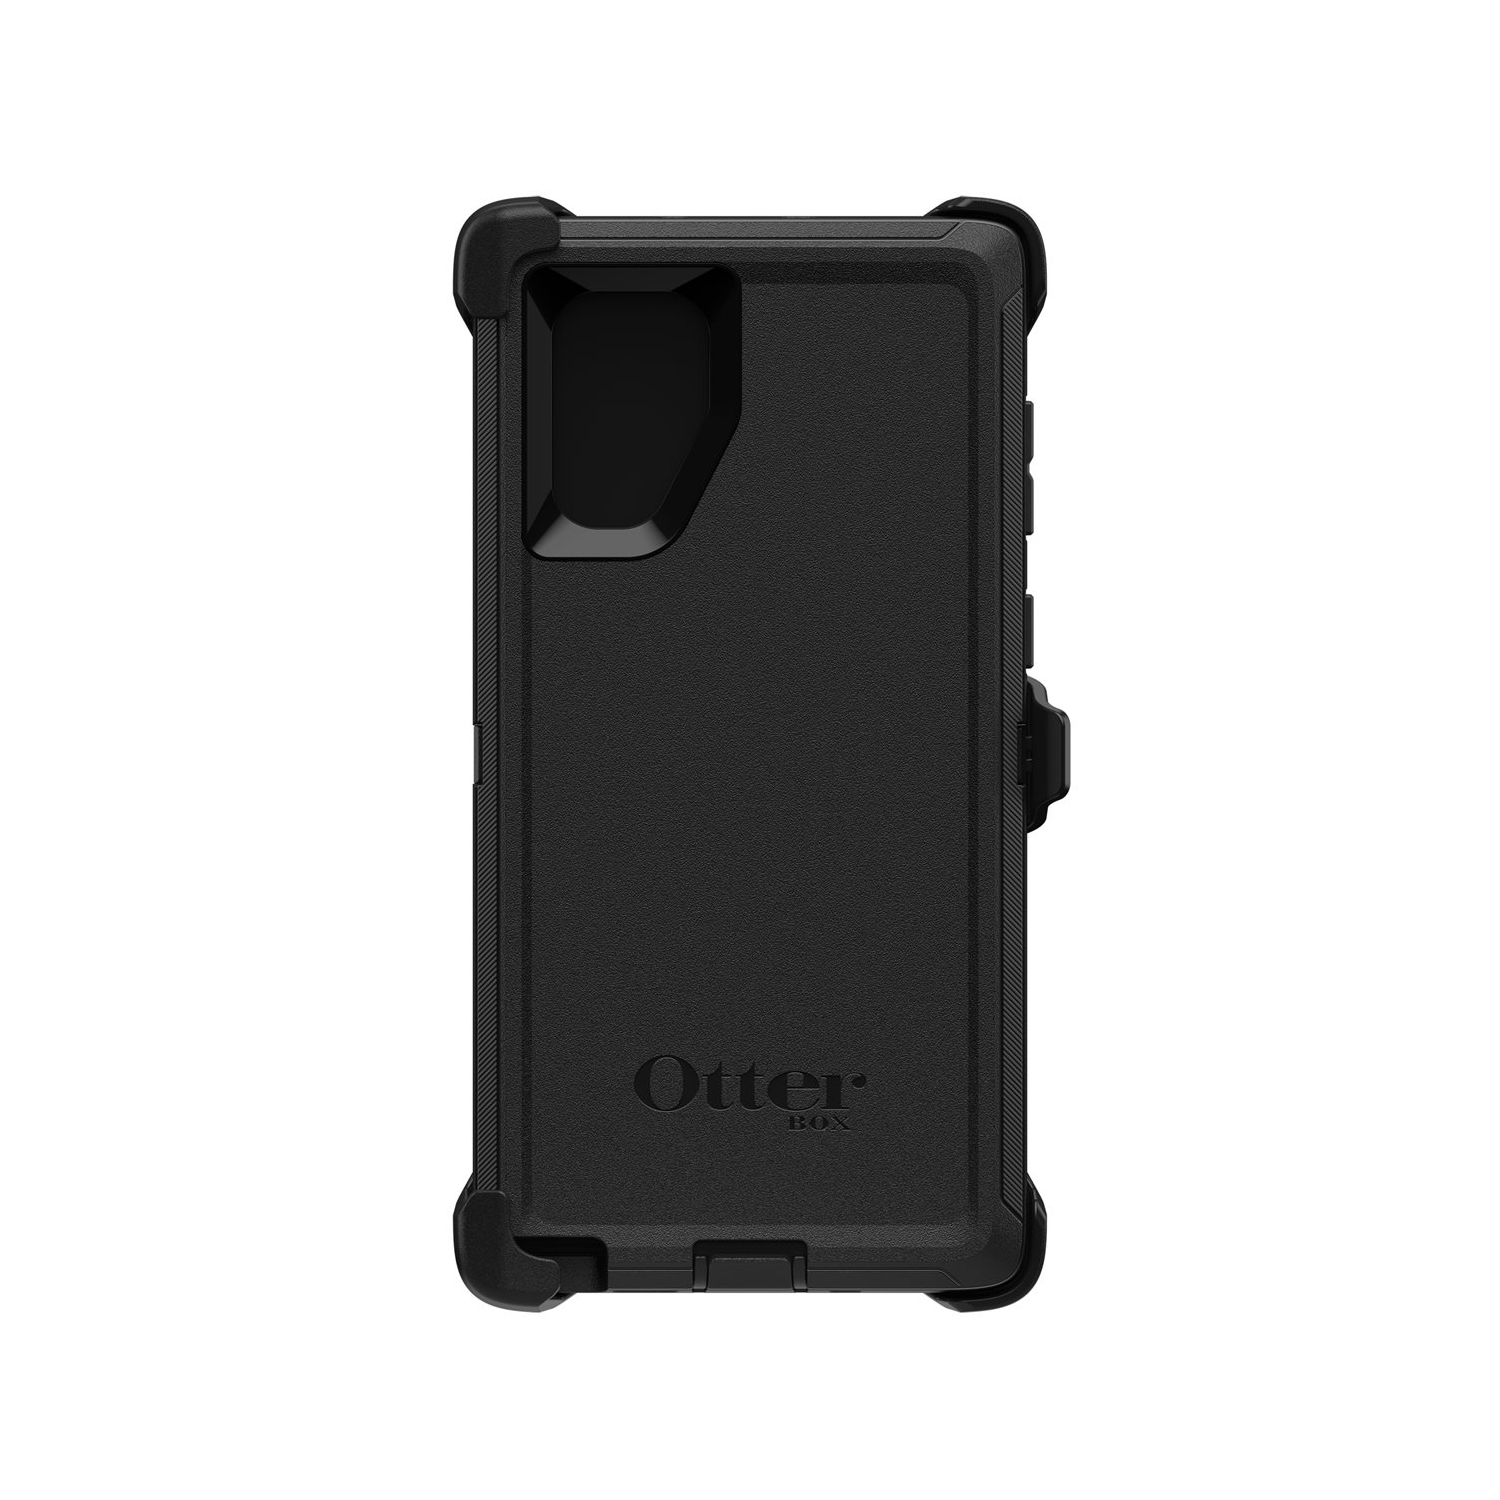 OtterBox Defender Carrying Case (Holster) Samsung Galaxy Note10, Galaxy Note10 5G Smartphone - Black 77-63674